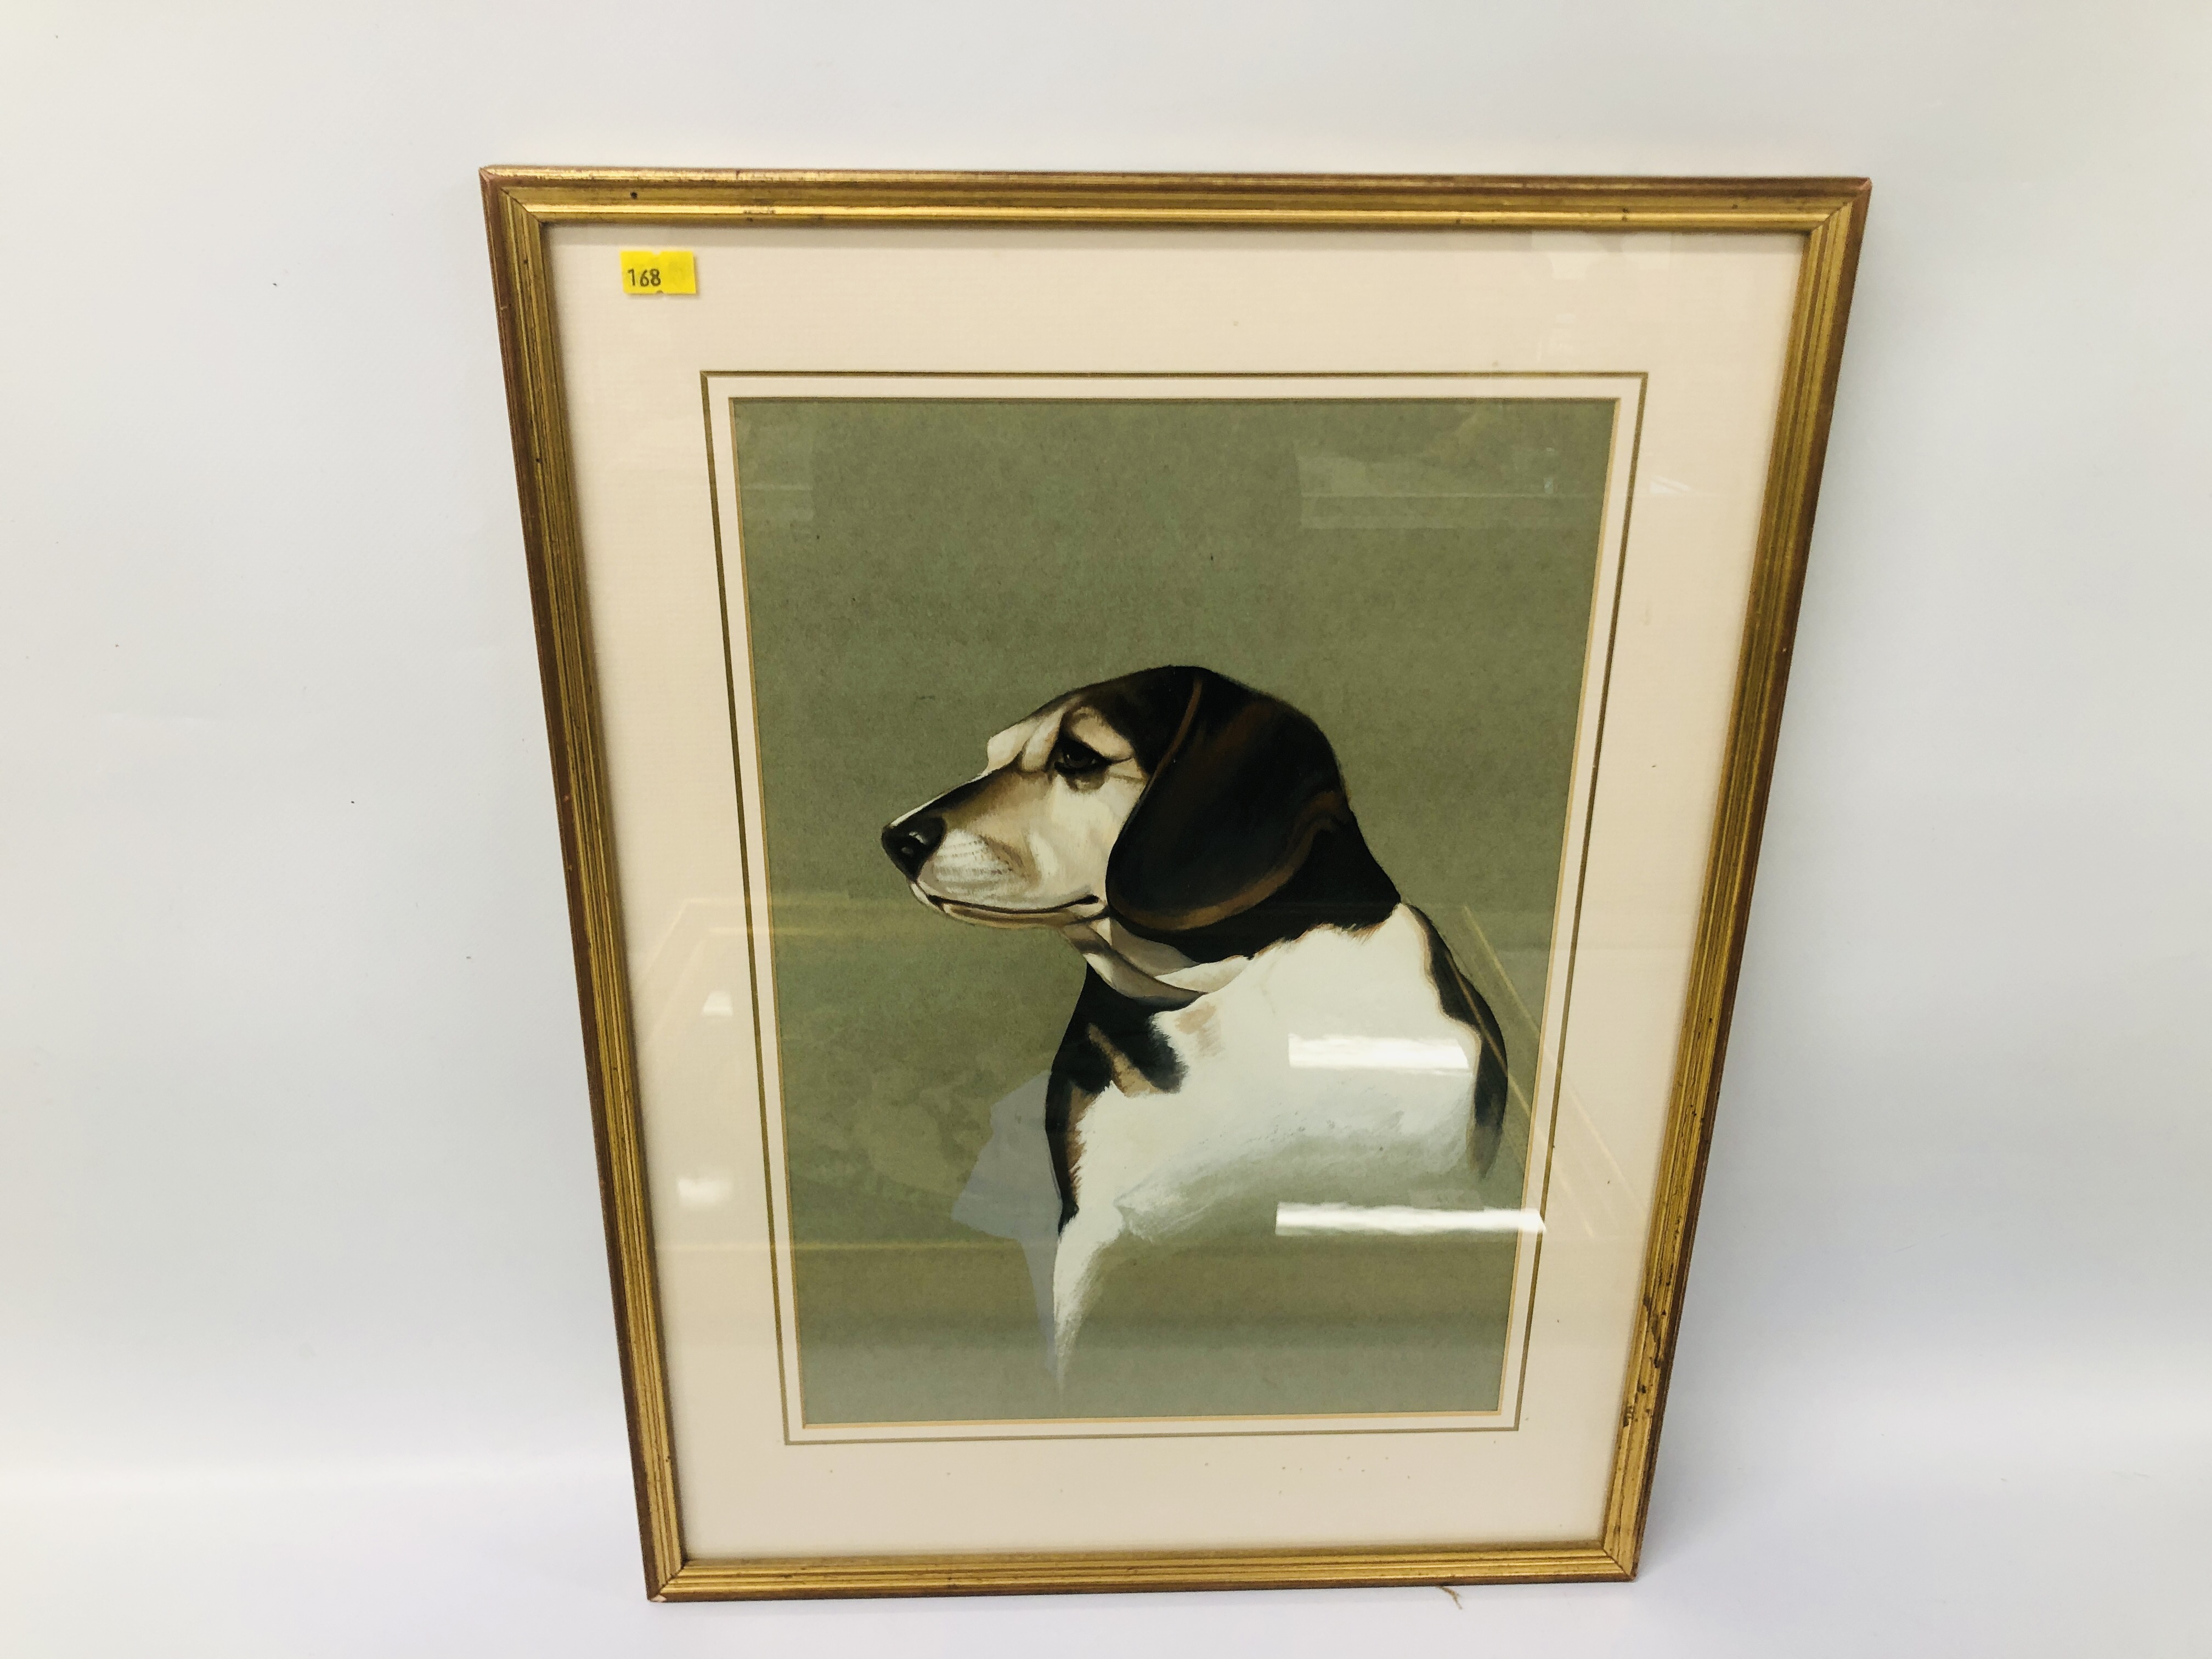 FRAMED OIL OF A BEAGLE "TOBY" IN OVAL MOUNT BEARING SIGNATURE D. CLARK - W 44CM. H 34CM. - Image 2 of 5